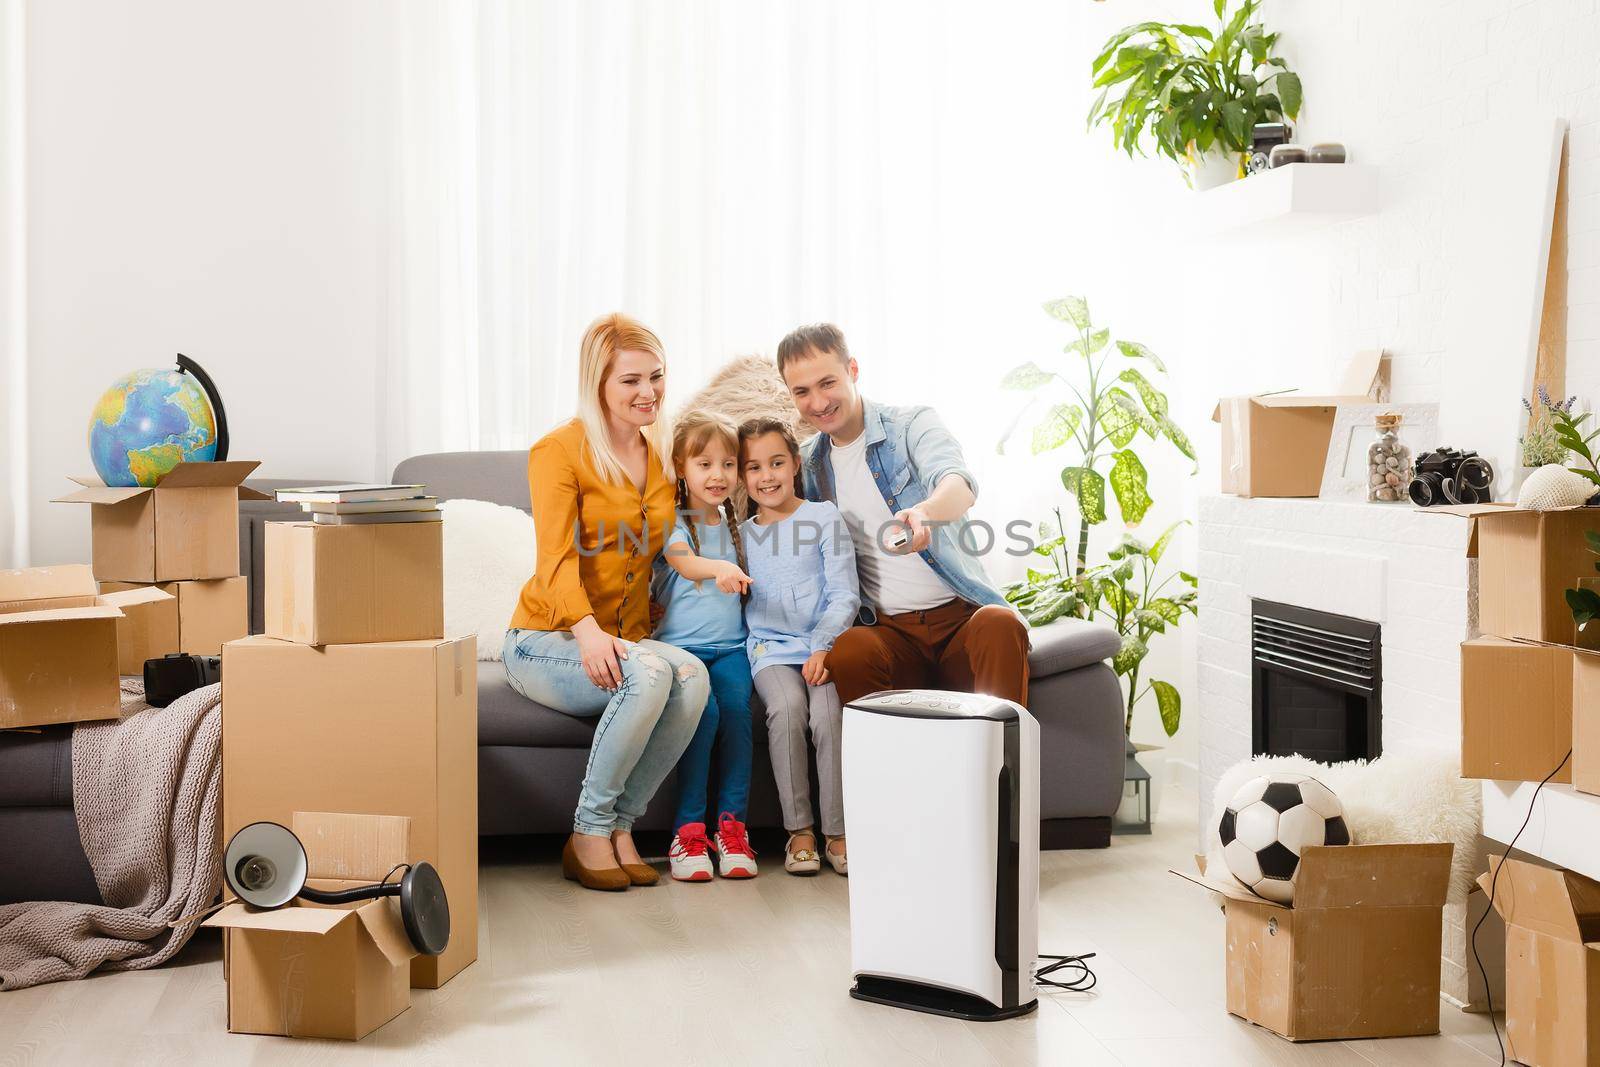 air purifier in living room with happy family moving to new apartment by Andelov13